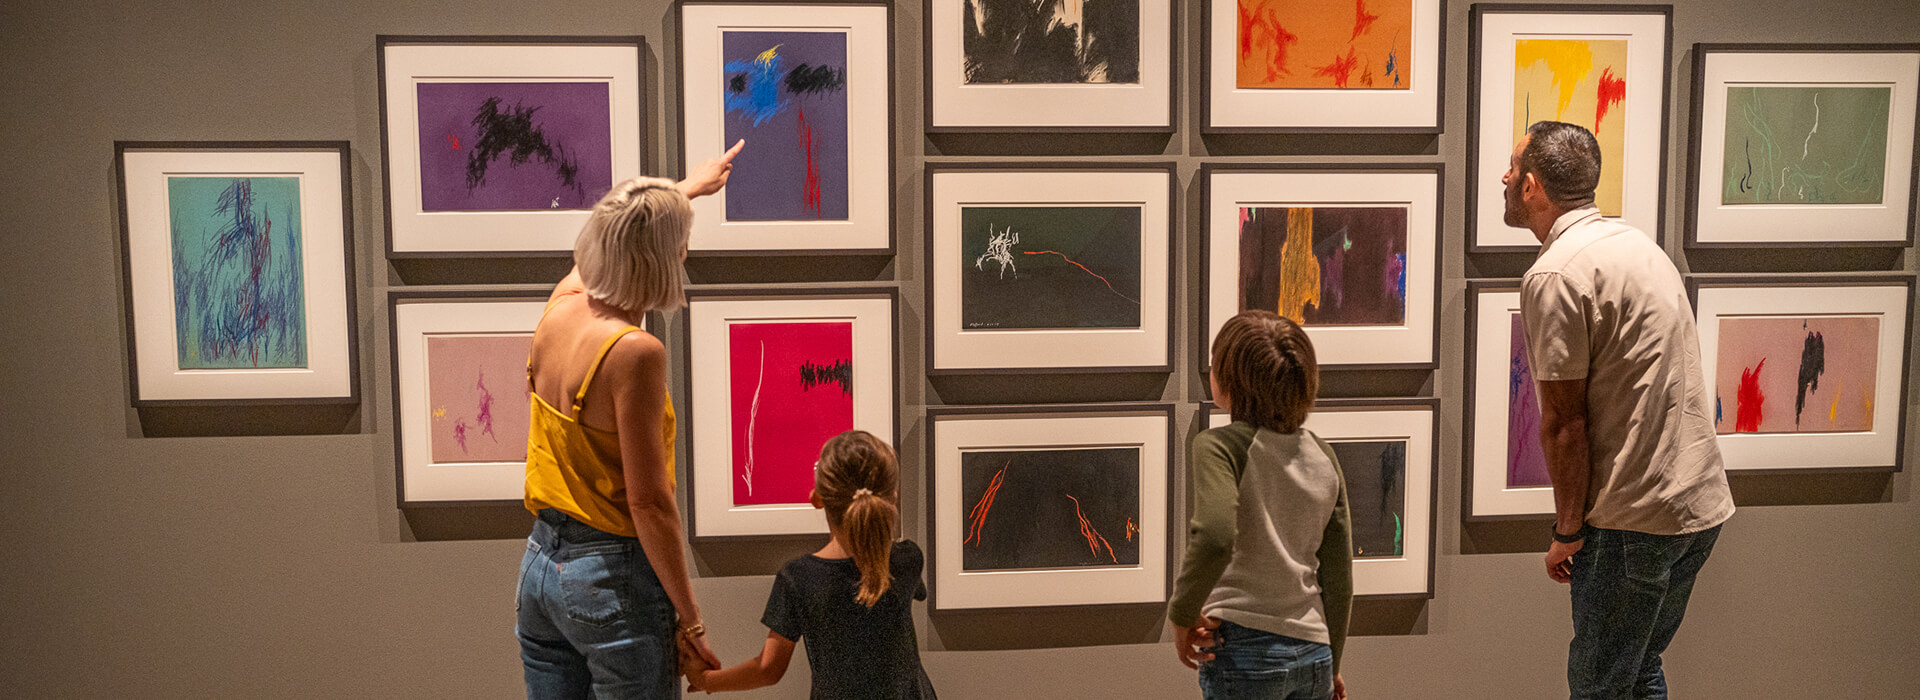 A family looks closely at a wall of framed pastel on construction paper artworks